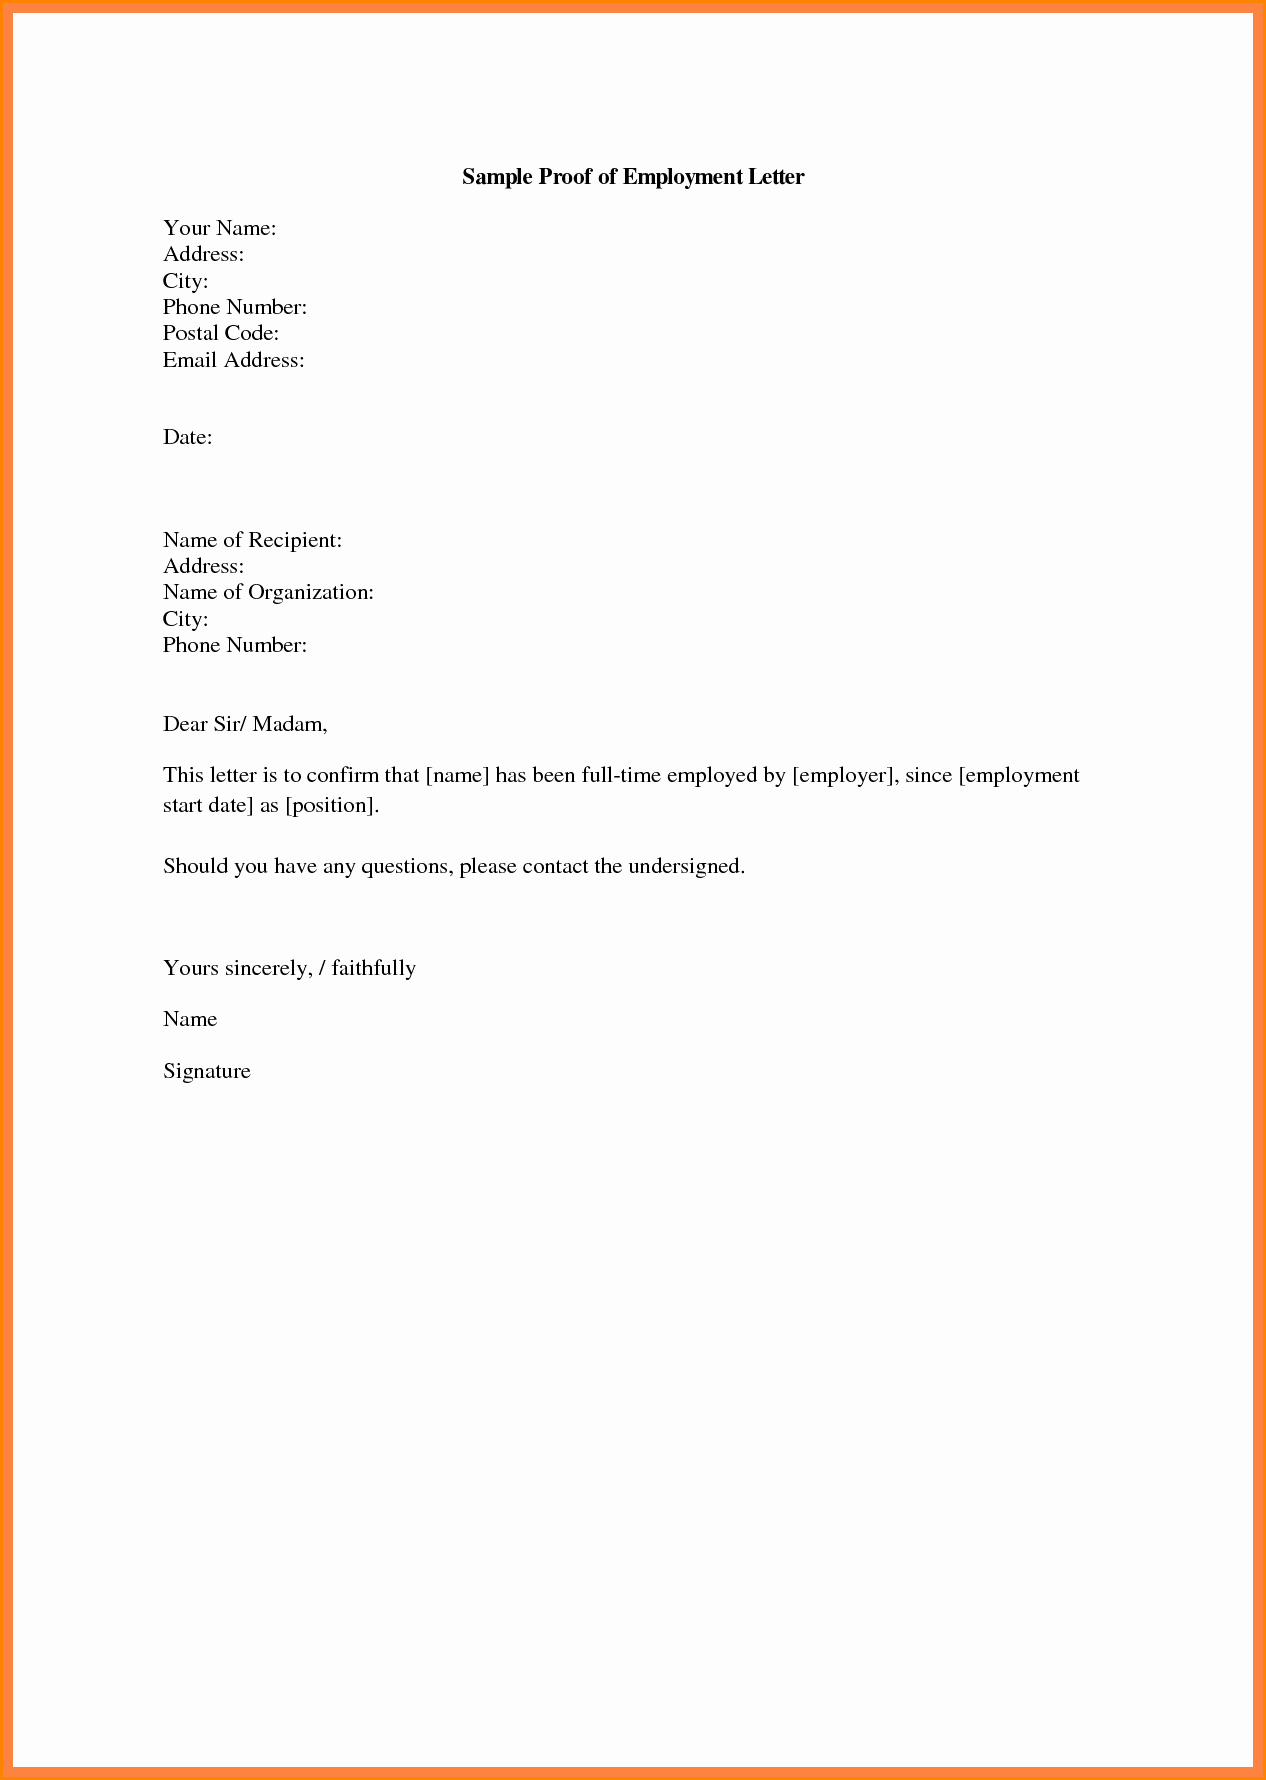 Proof Of Employment Letter Template Beautiful 8 Salary Confirmation Letter Request Sample